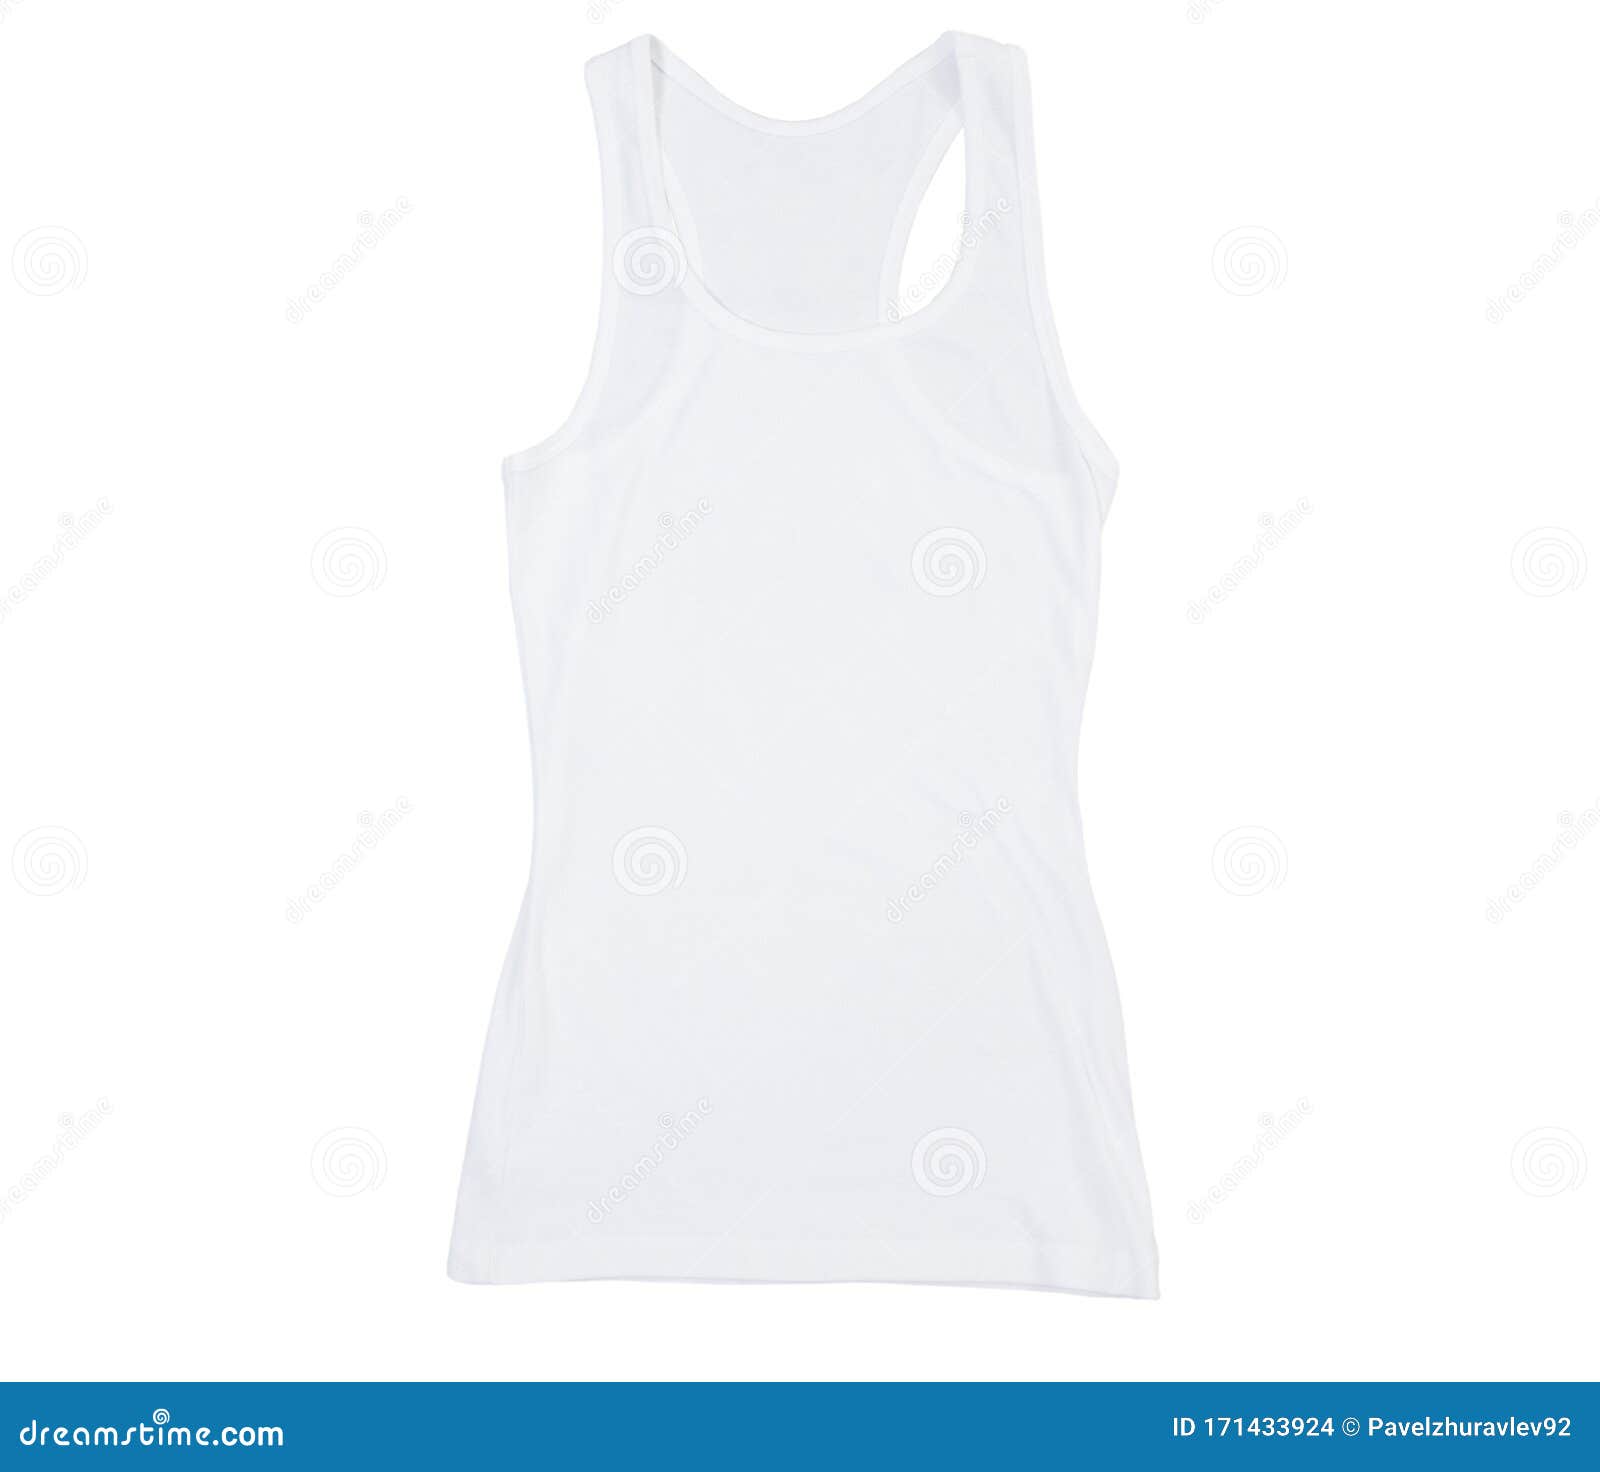 White Tank Top Mock Up, Plain Hollow Female Tank Top Shirt, Isolated on ...